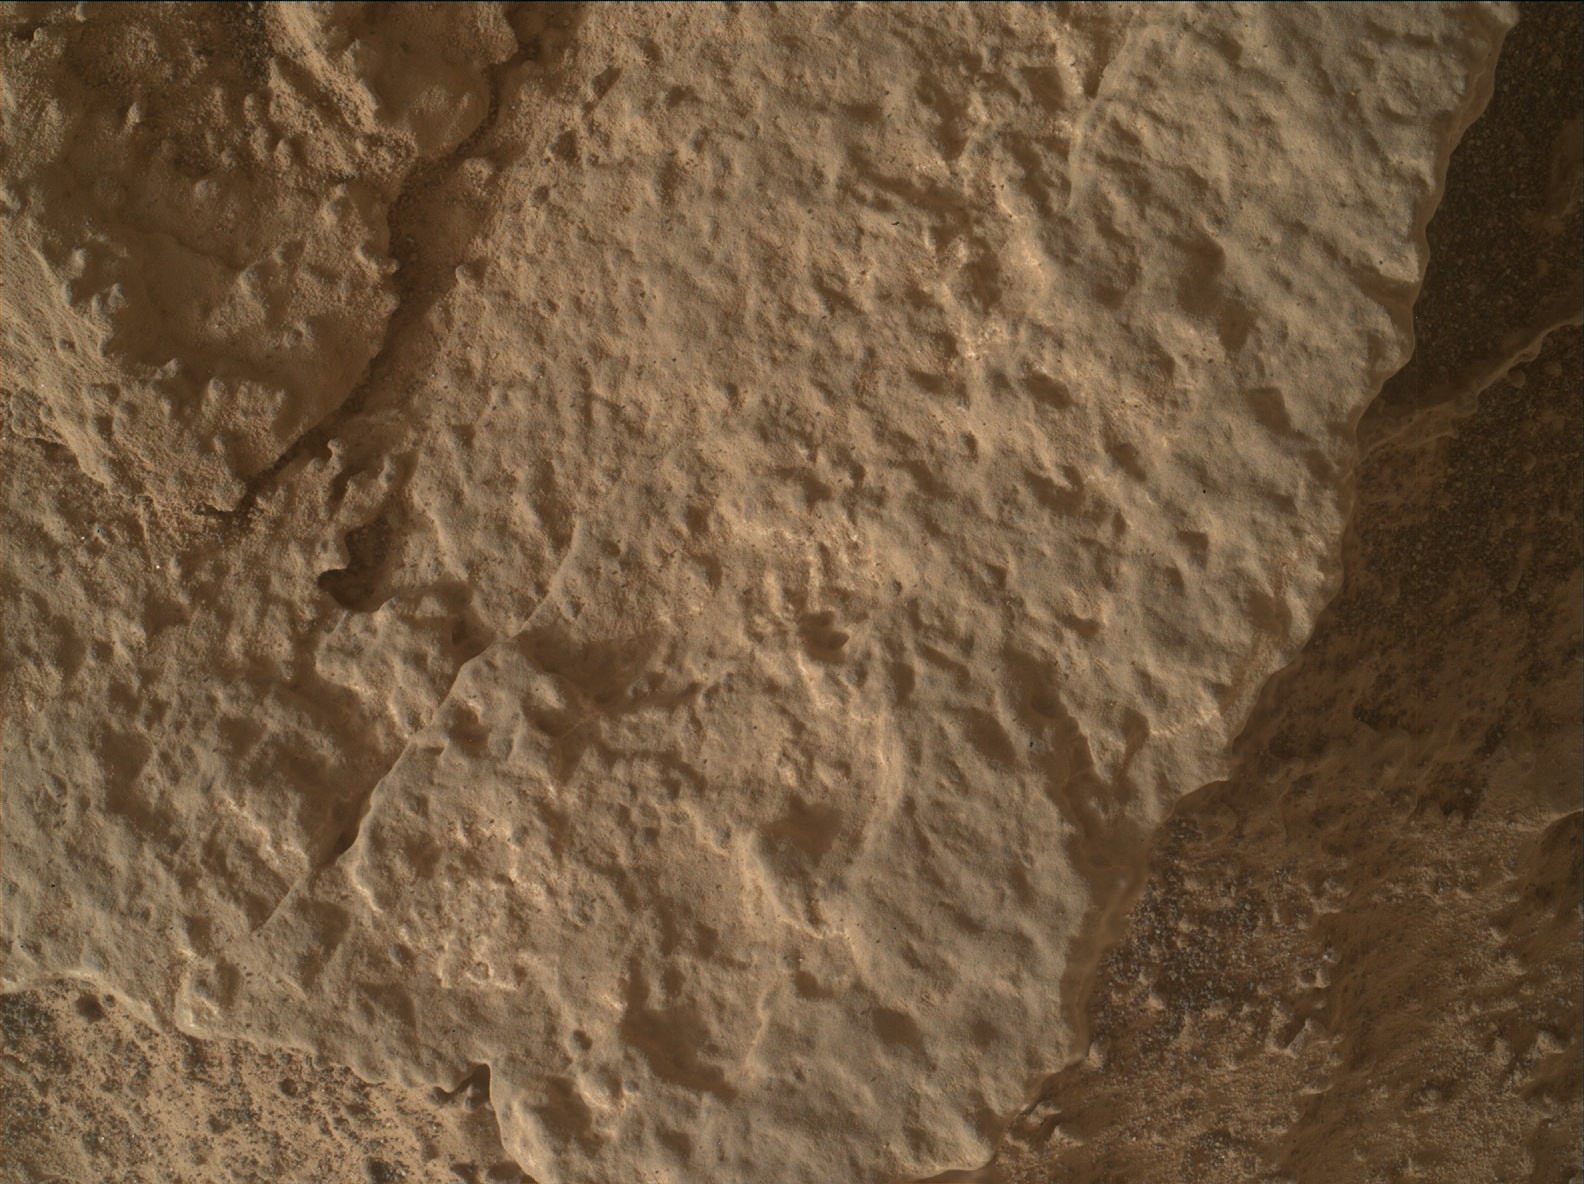 Nasa's Mars rover Curiosity acquired this image using its Mars Hand Lens Imager (MAHLI) on Sol 3533